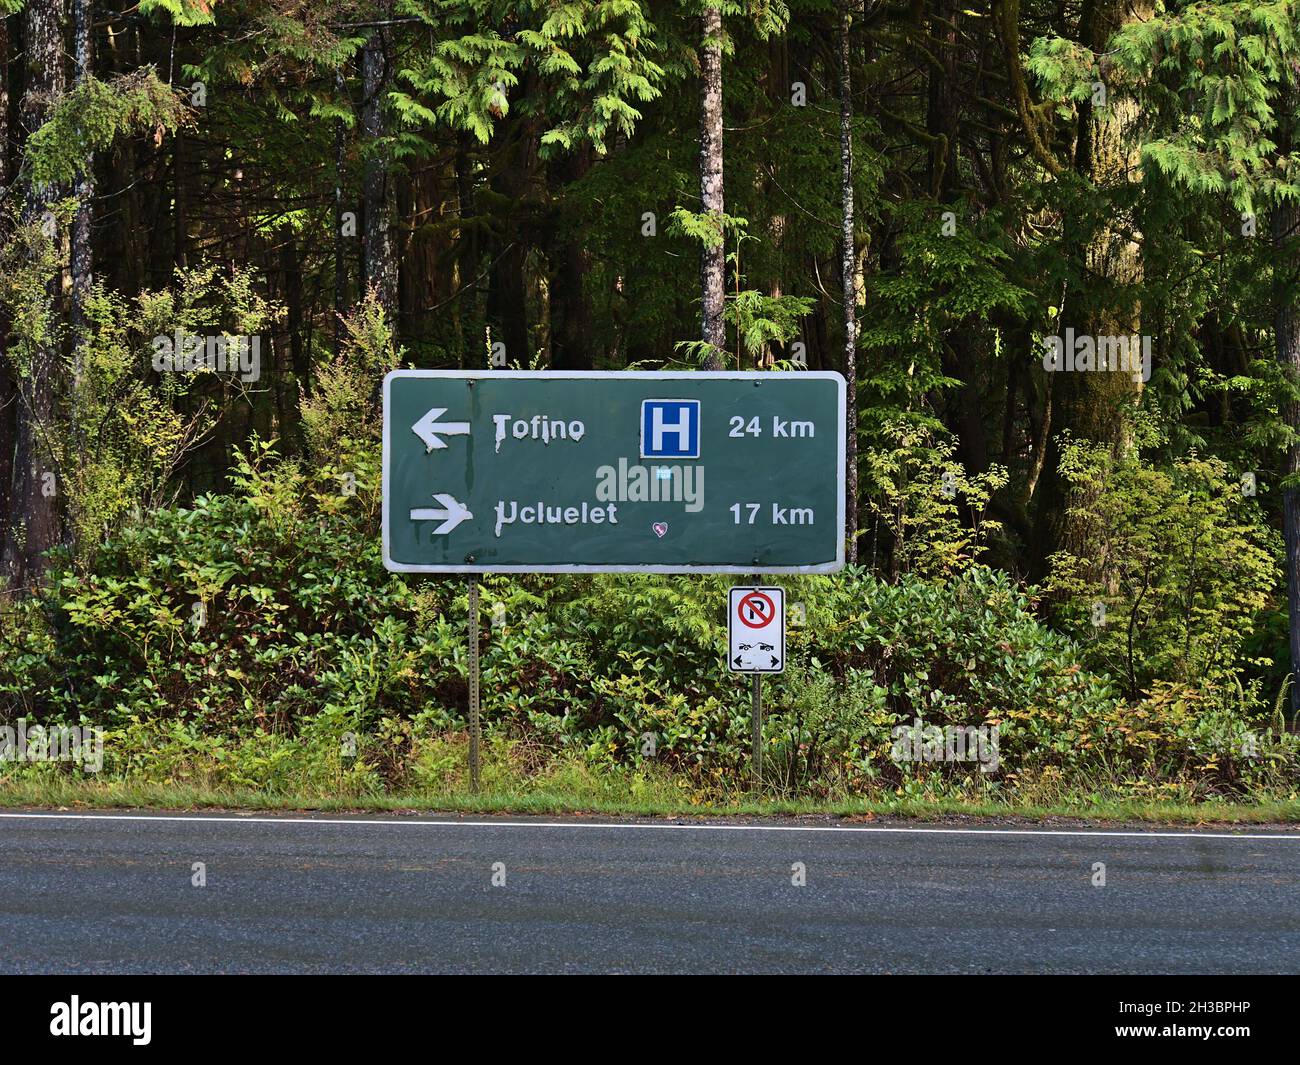 Front view of directional road sign near Rainforest Trail showing the directions and distance to Tofino and Ucluelet. Focus on sign. Stock Photo